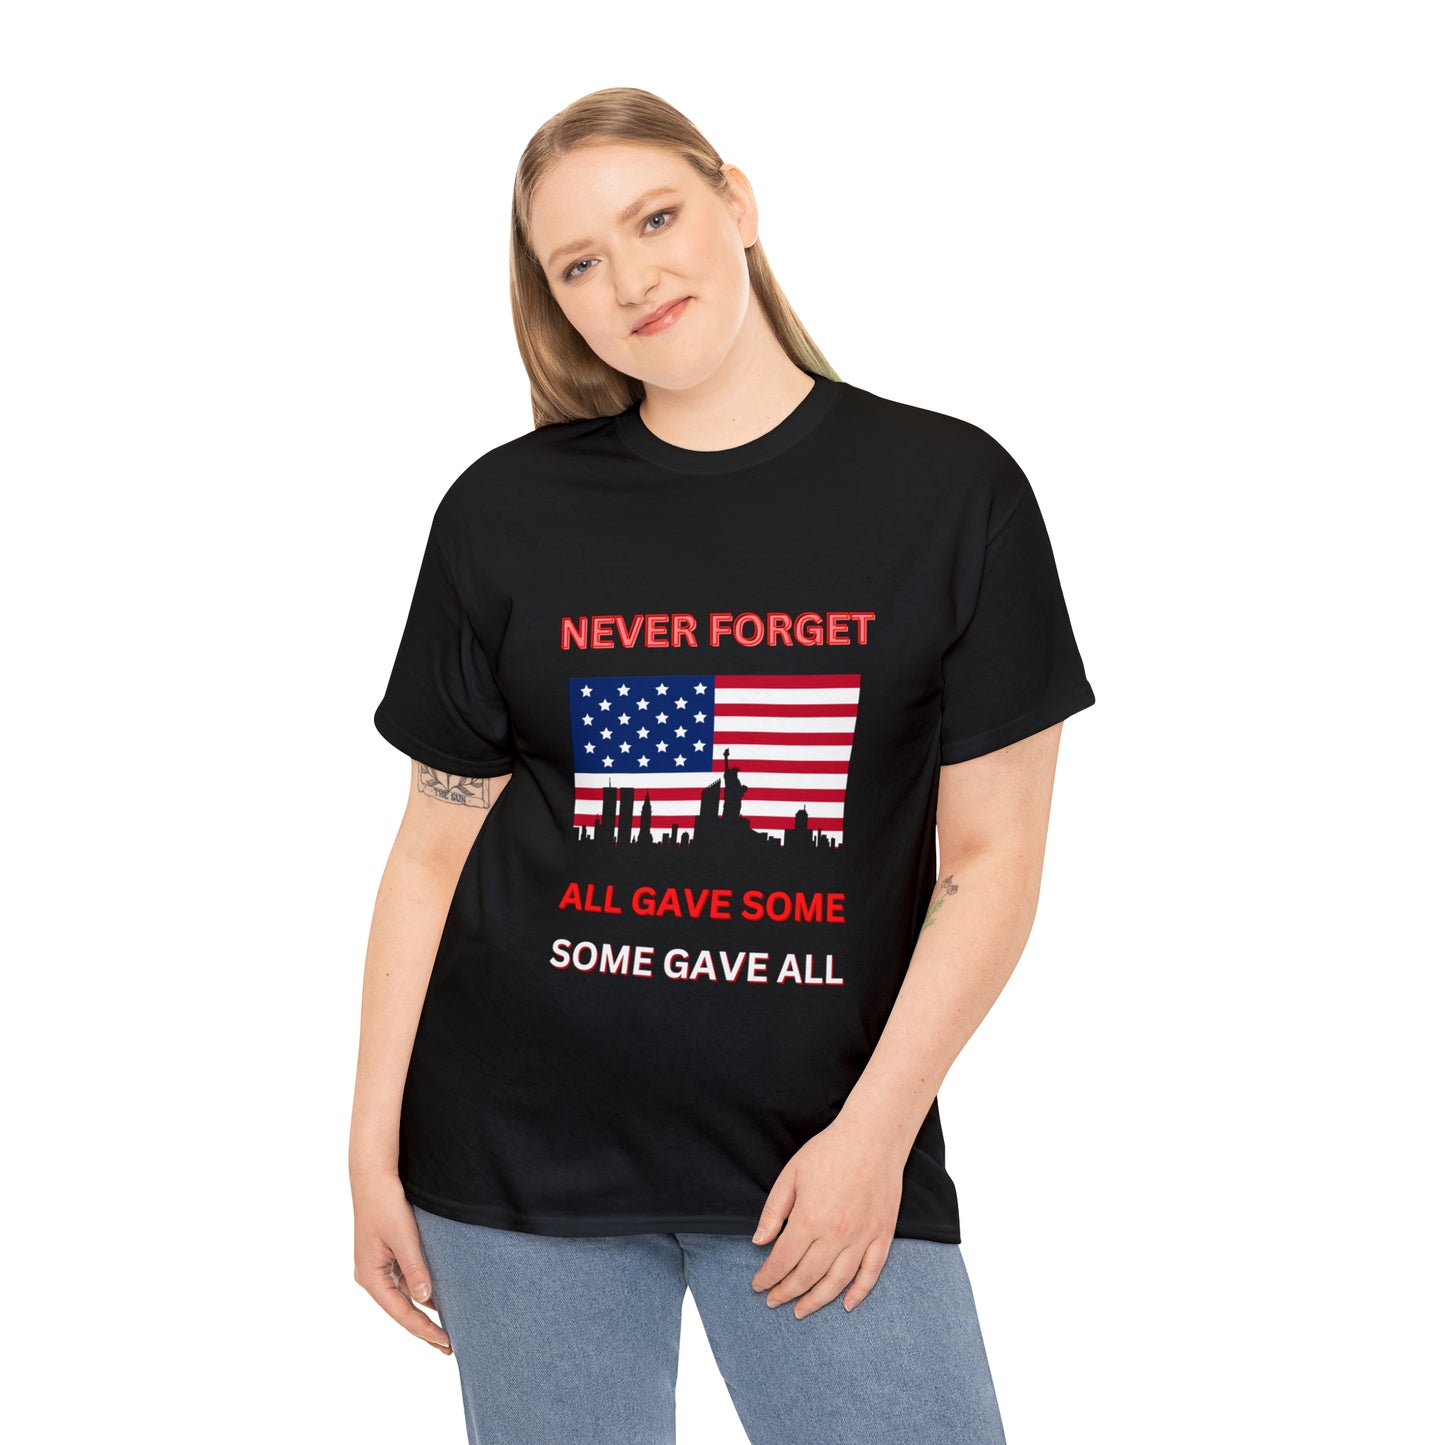 Unisex Heavy Cotton Tee- Never Forget Some Gave All